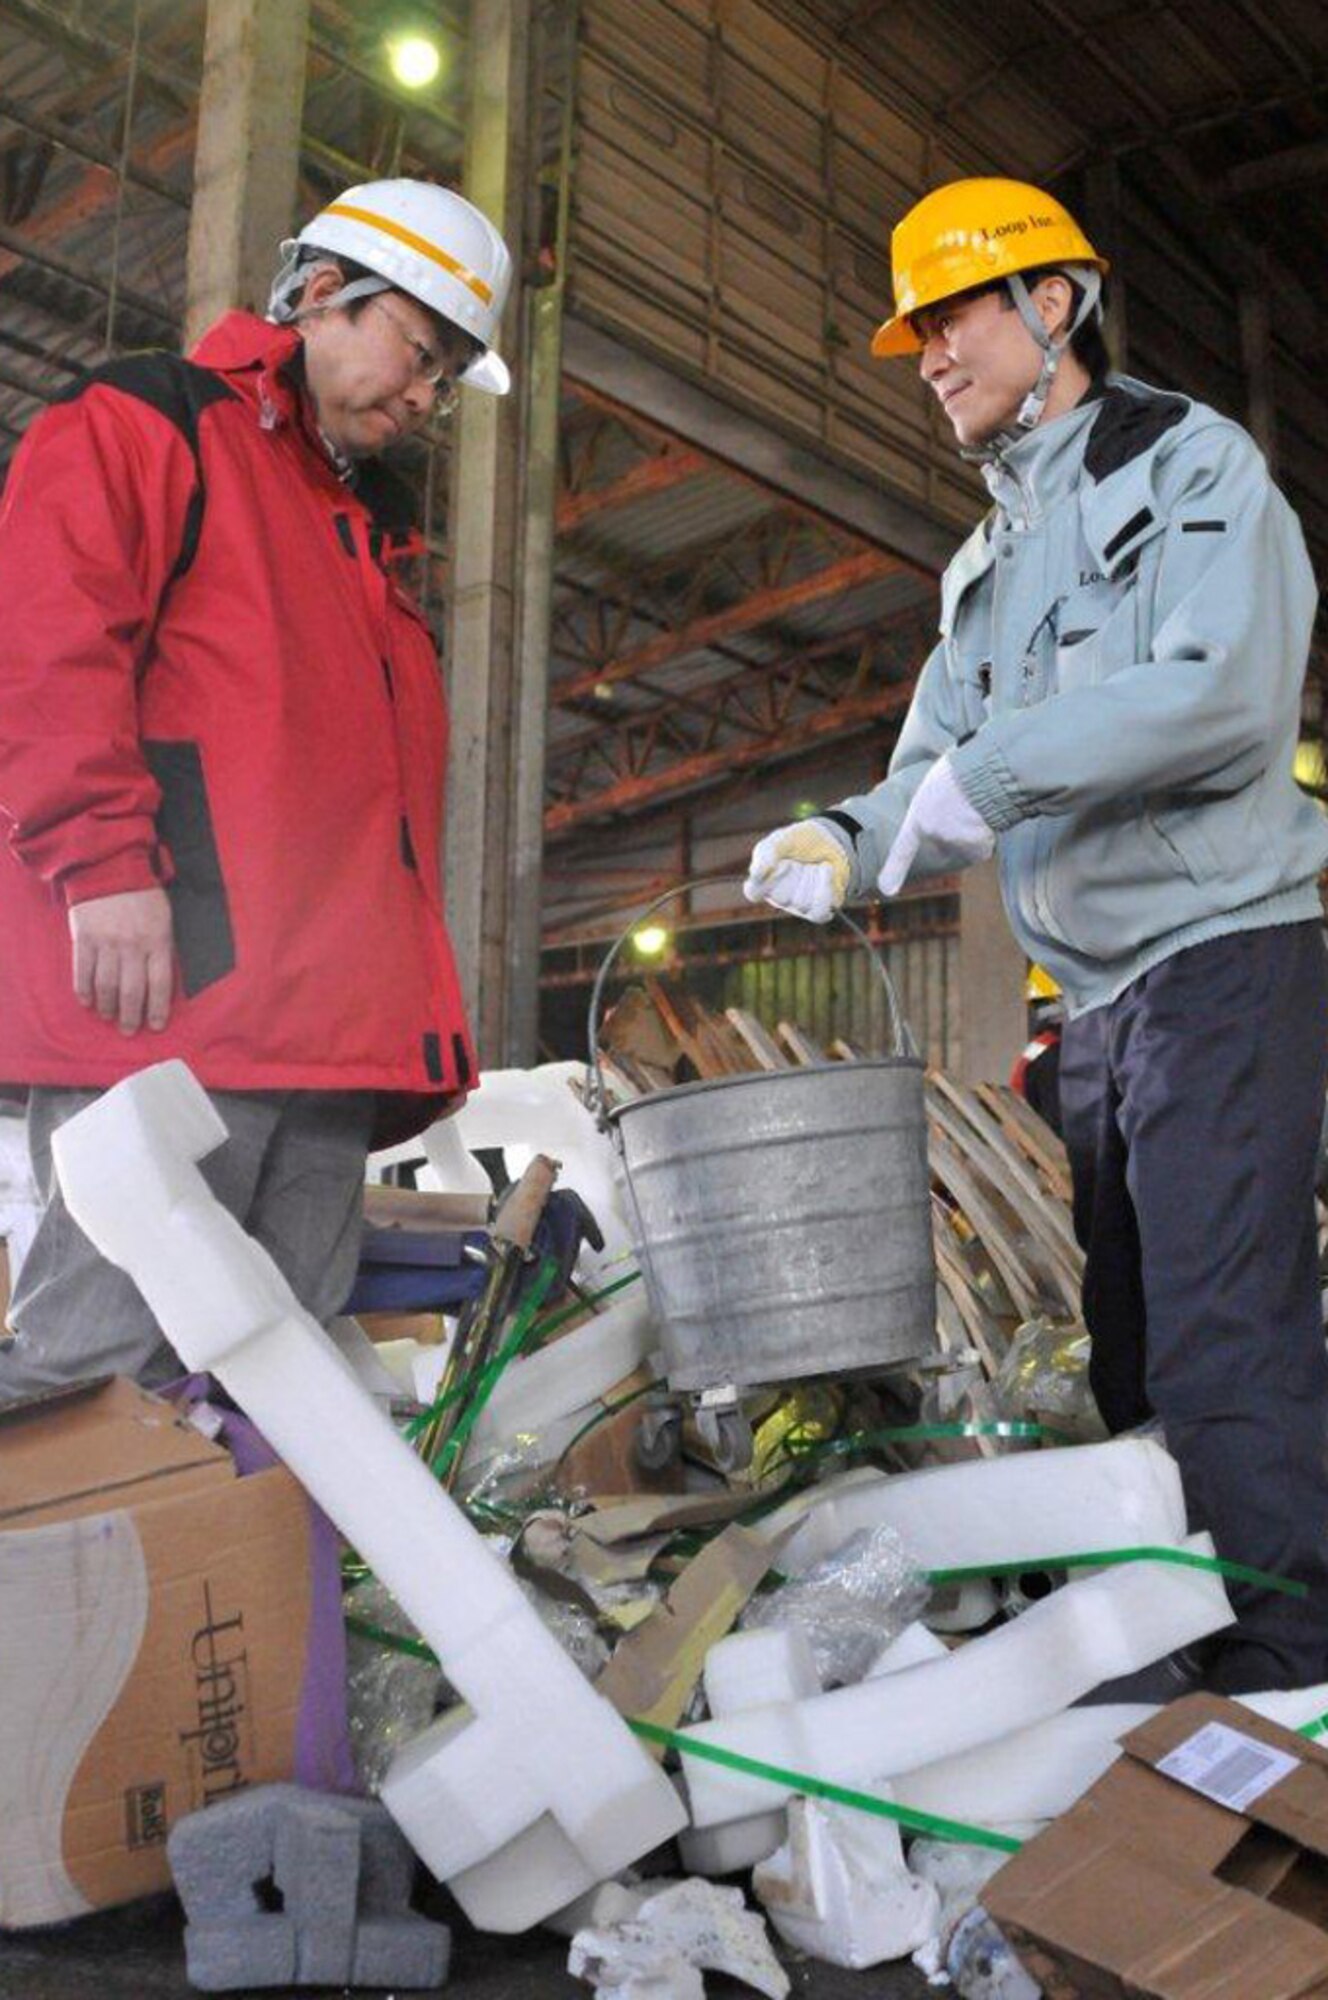 Haruhito Ishixuka, Hosoya Disposal Site Misawa Air Base trash manager, right, points at a metal bucket found in a bulk trash delivery as Hajime Sasaki, 35th Civil Engineer Squadron solid waste manager, looks on in Misawa City, Japan, Feb. 28, 2013. The chief complaint of the Hosoya Disoposal Site is recyclables being mixed with bulk waste. Hosoya is the final stop for all of the base’s trash and recyclables. (U.S. Air Force photo by Tech. Sgt. Phillip Butterfield) 